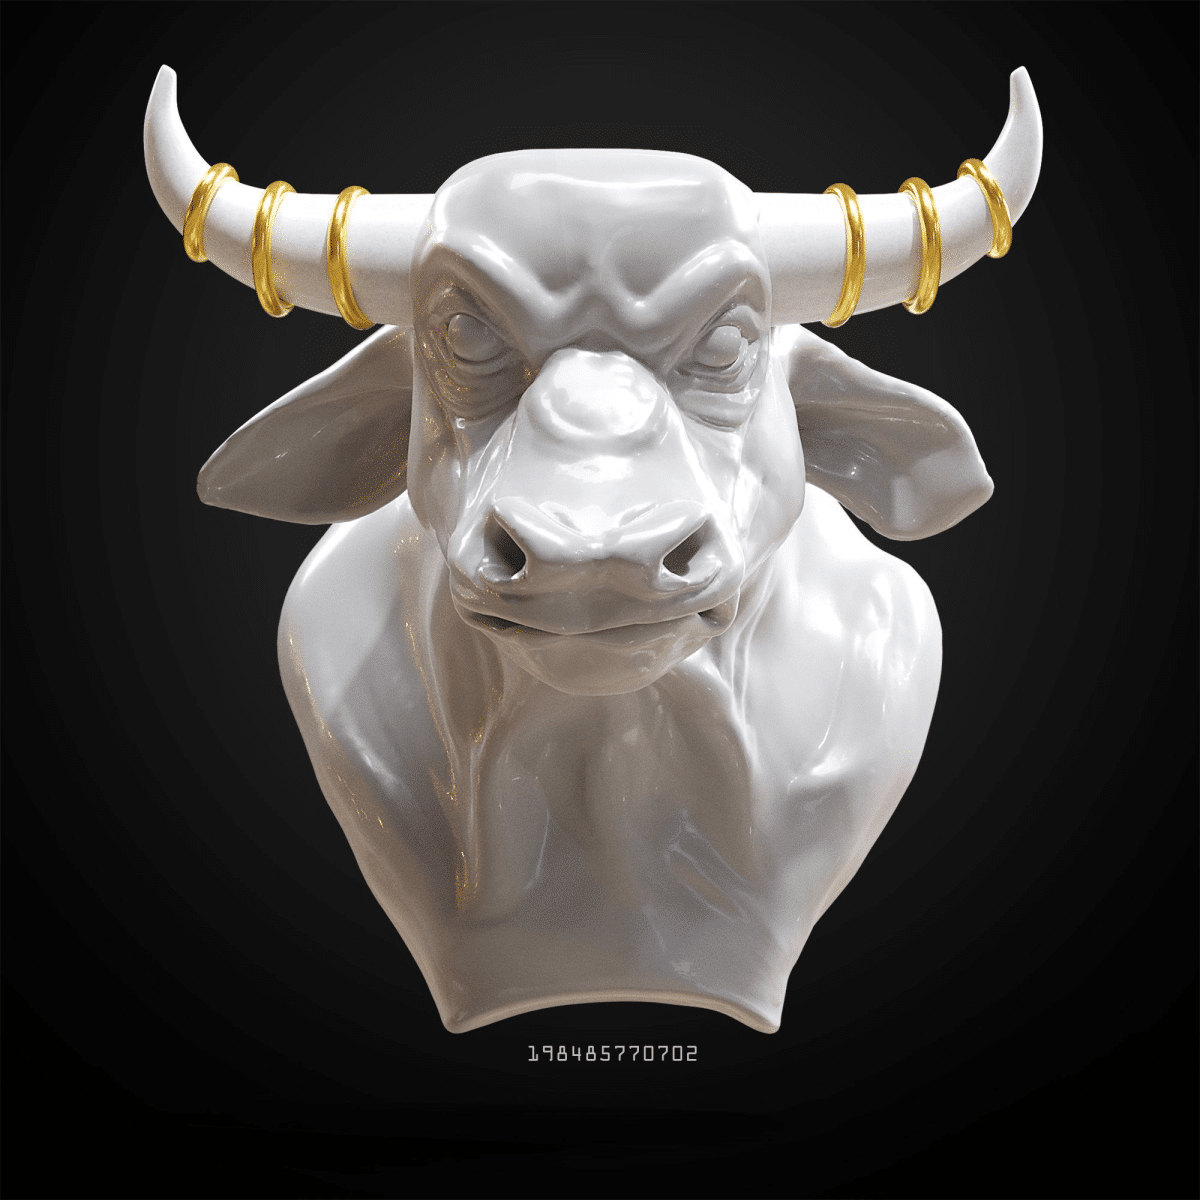 The picture depicts a white bull with six rings on its horn from Michael Jordan's Six Rings NFT